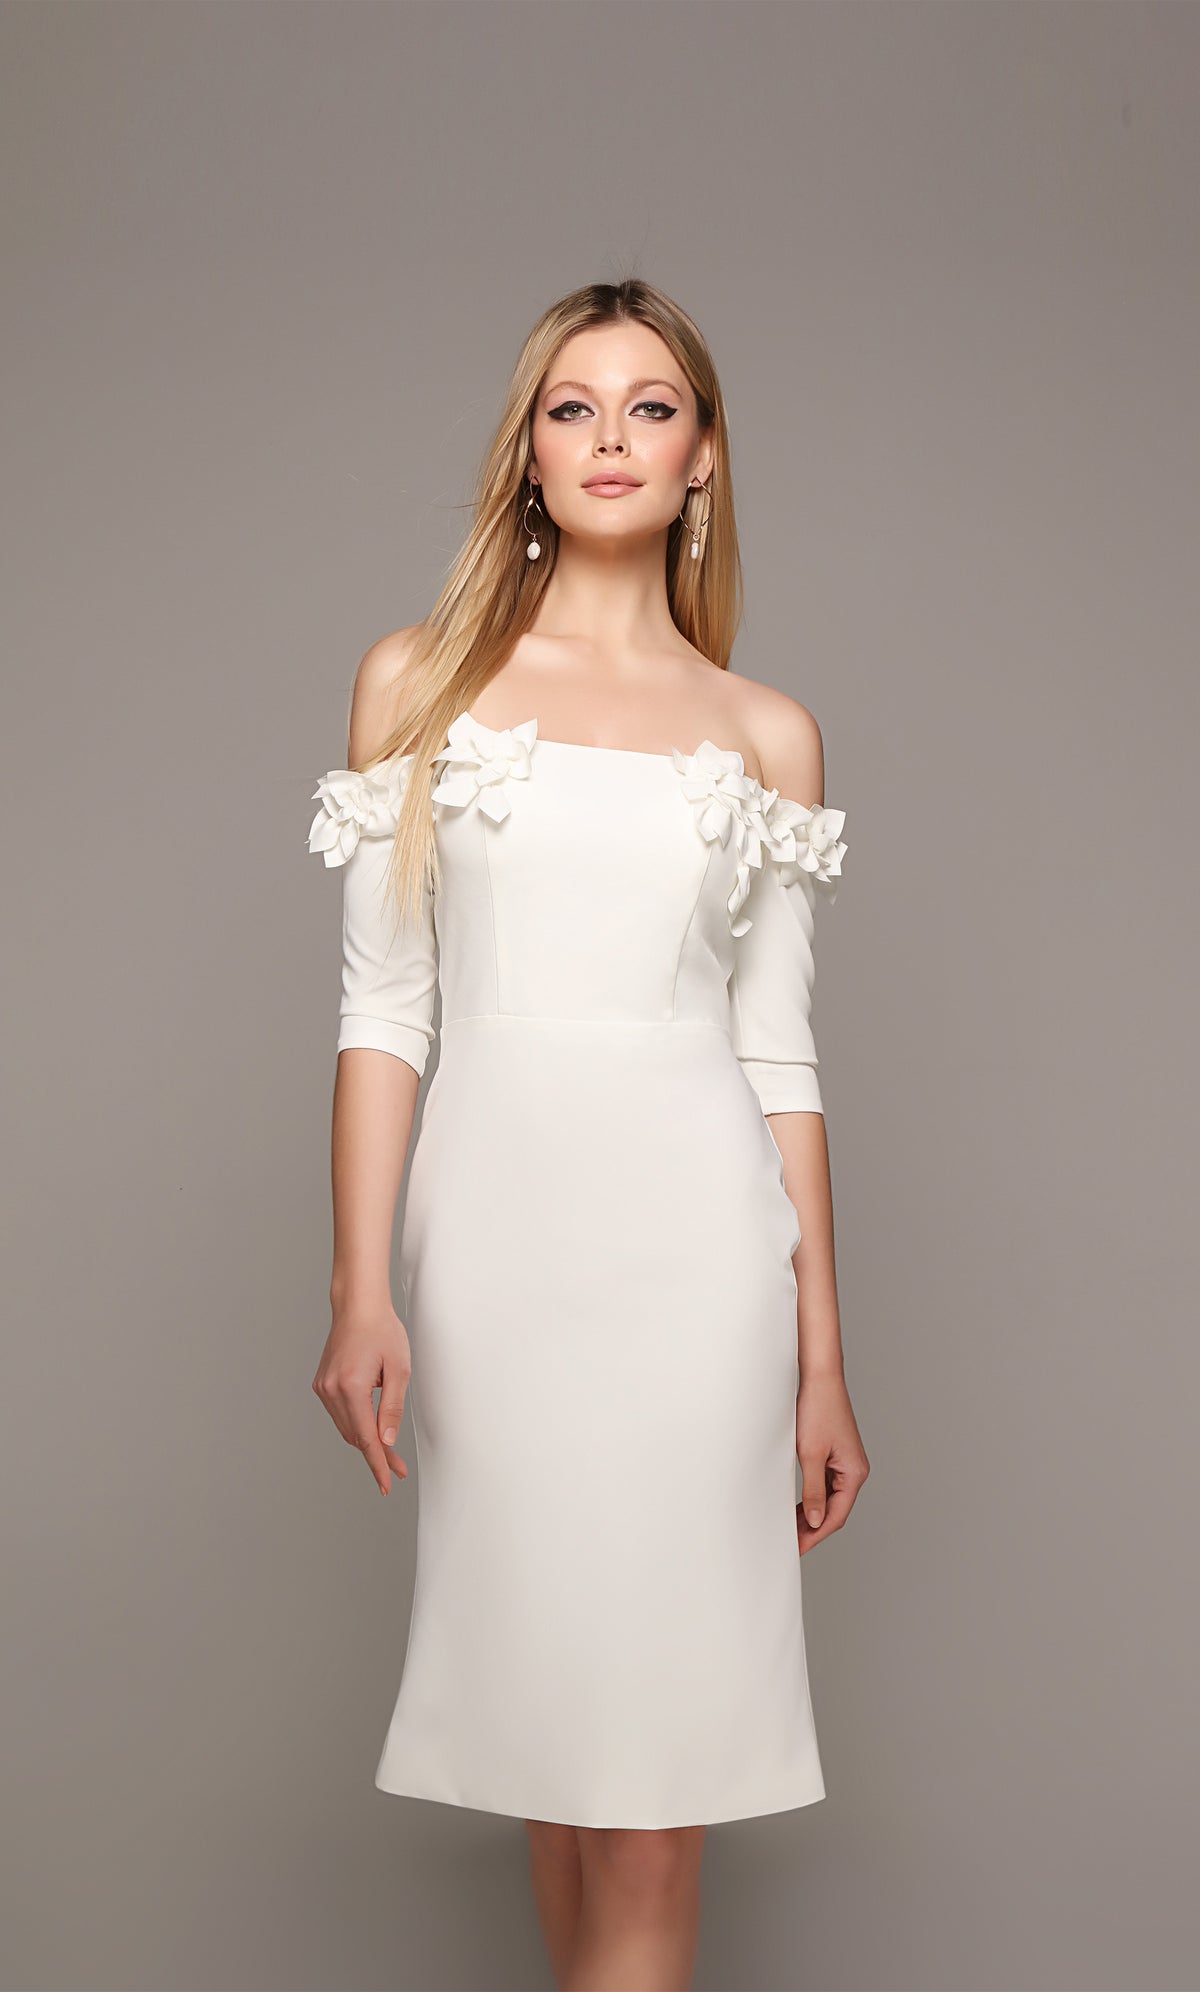 Foral engagement dress with an off the shoulder bodice in ivory.